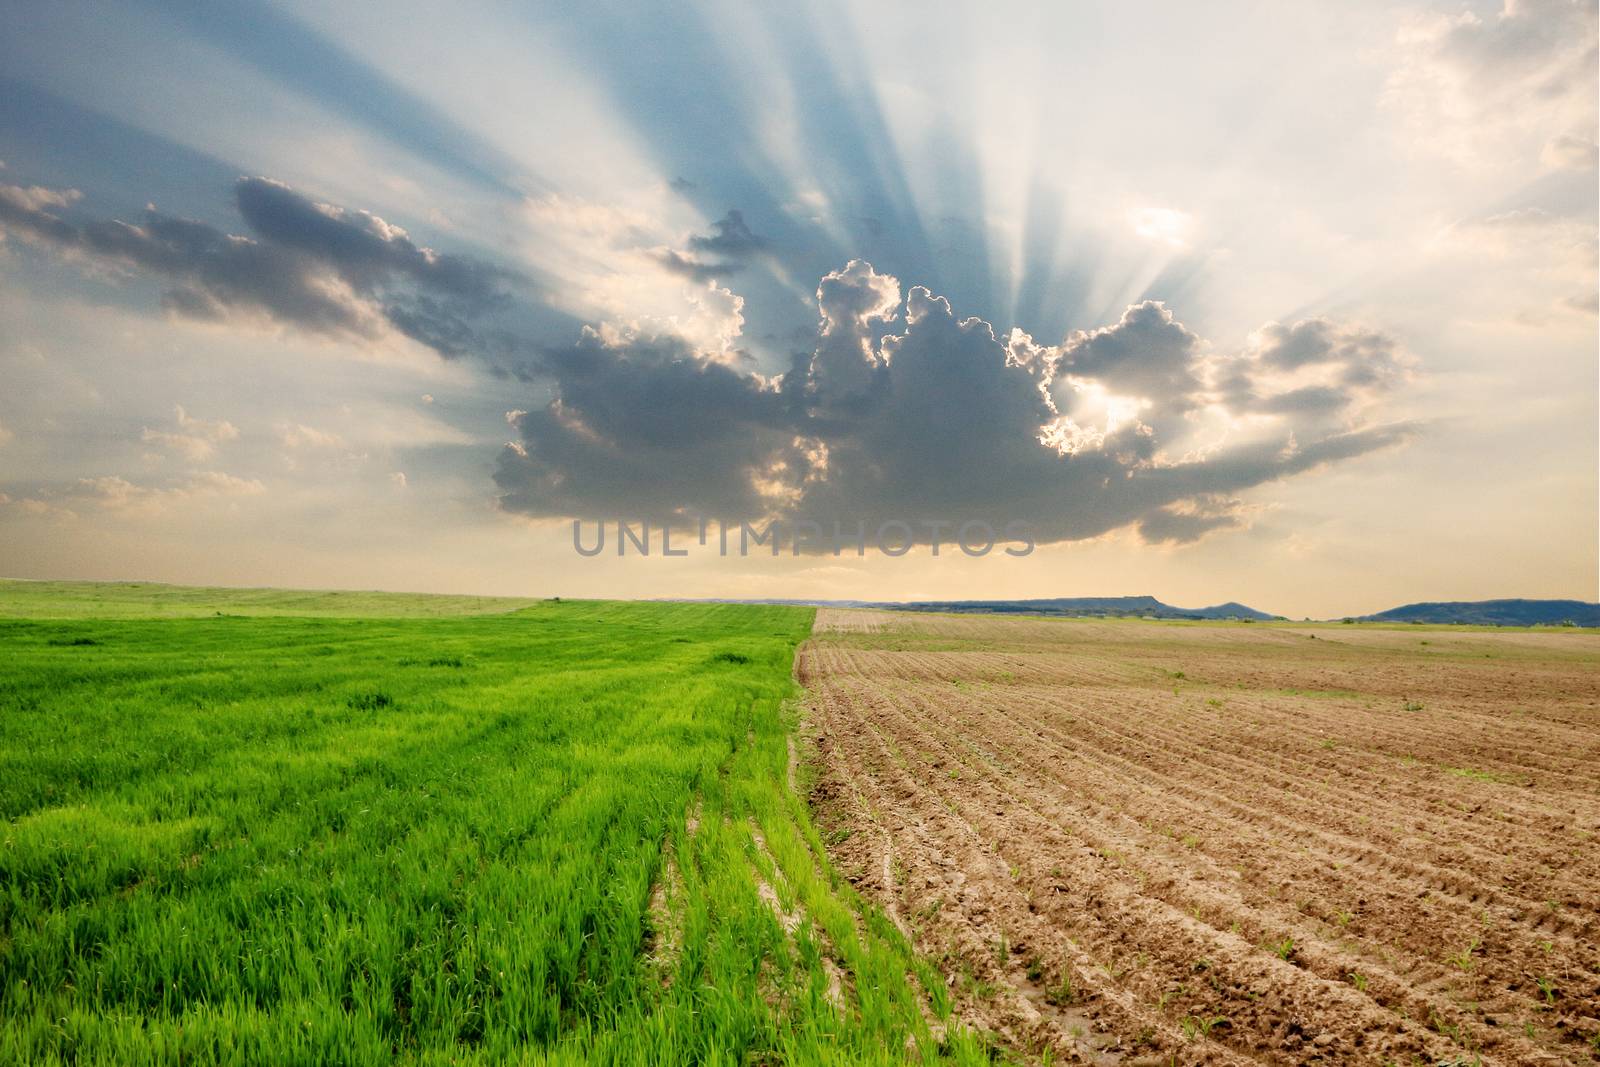 Two different parcels on a field with different stages of plant growth and a nice contrast between green and brown and an athmospheric phenomenon of sunrays bursting through a cloud